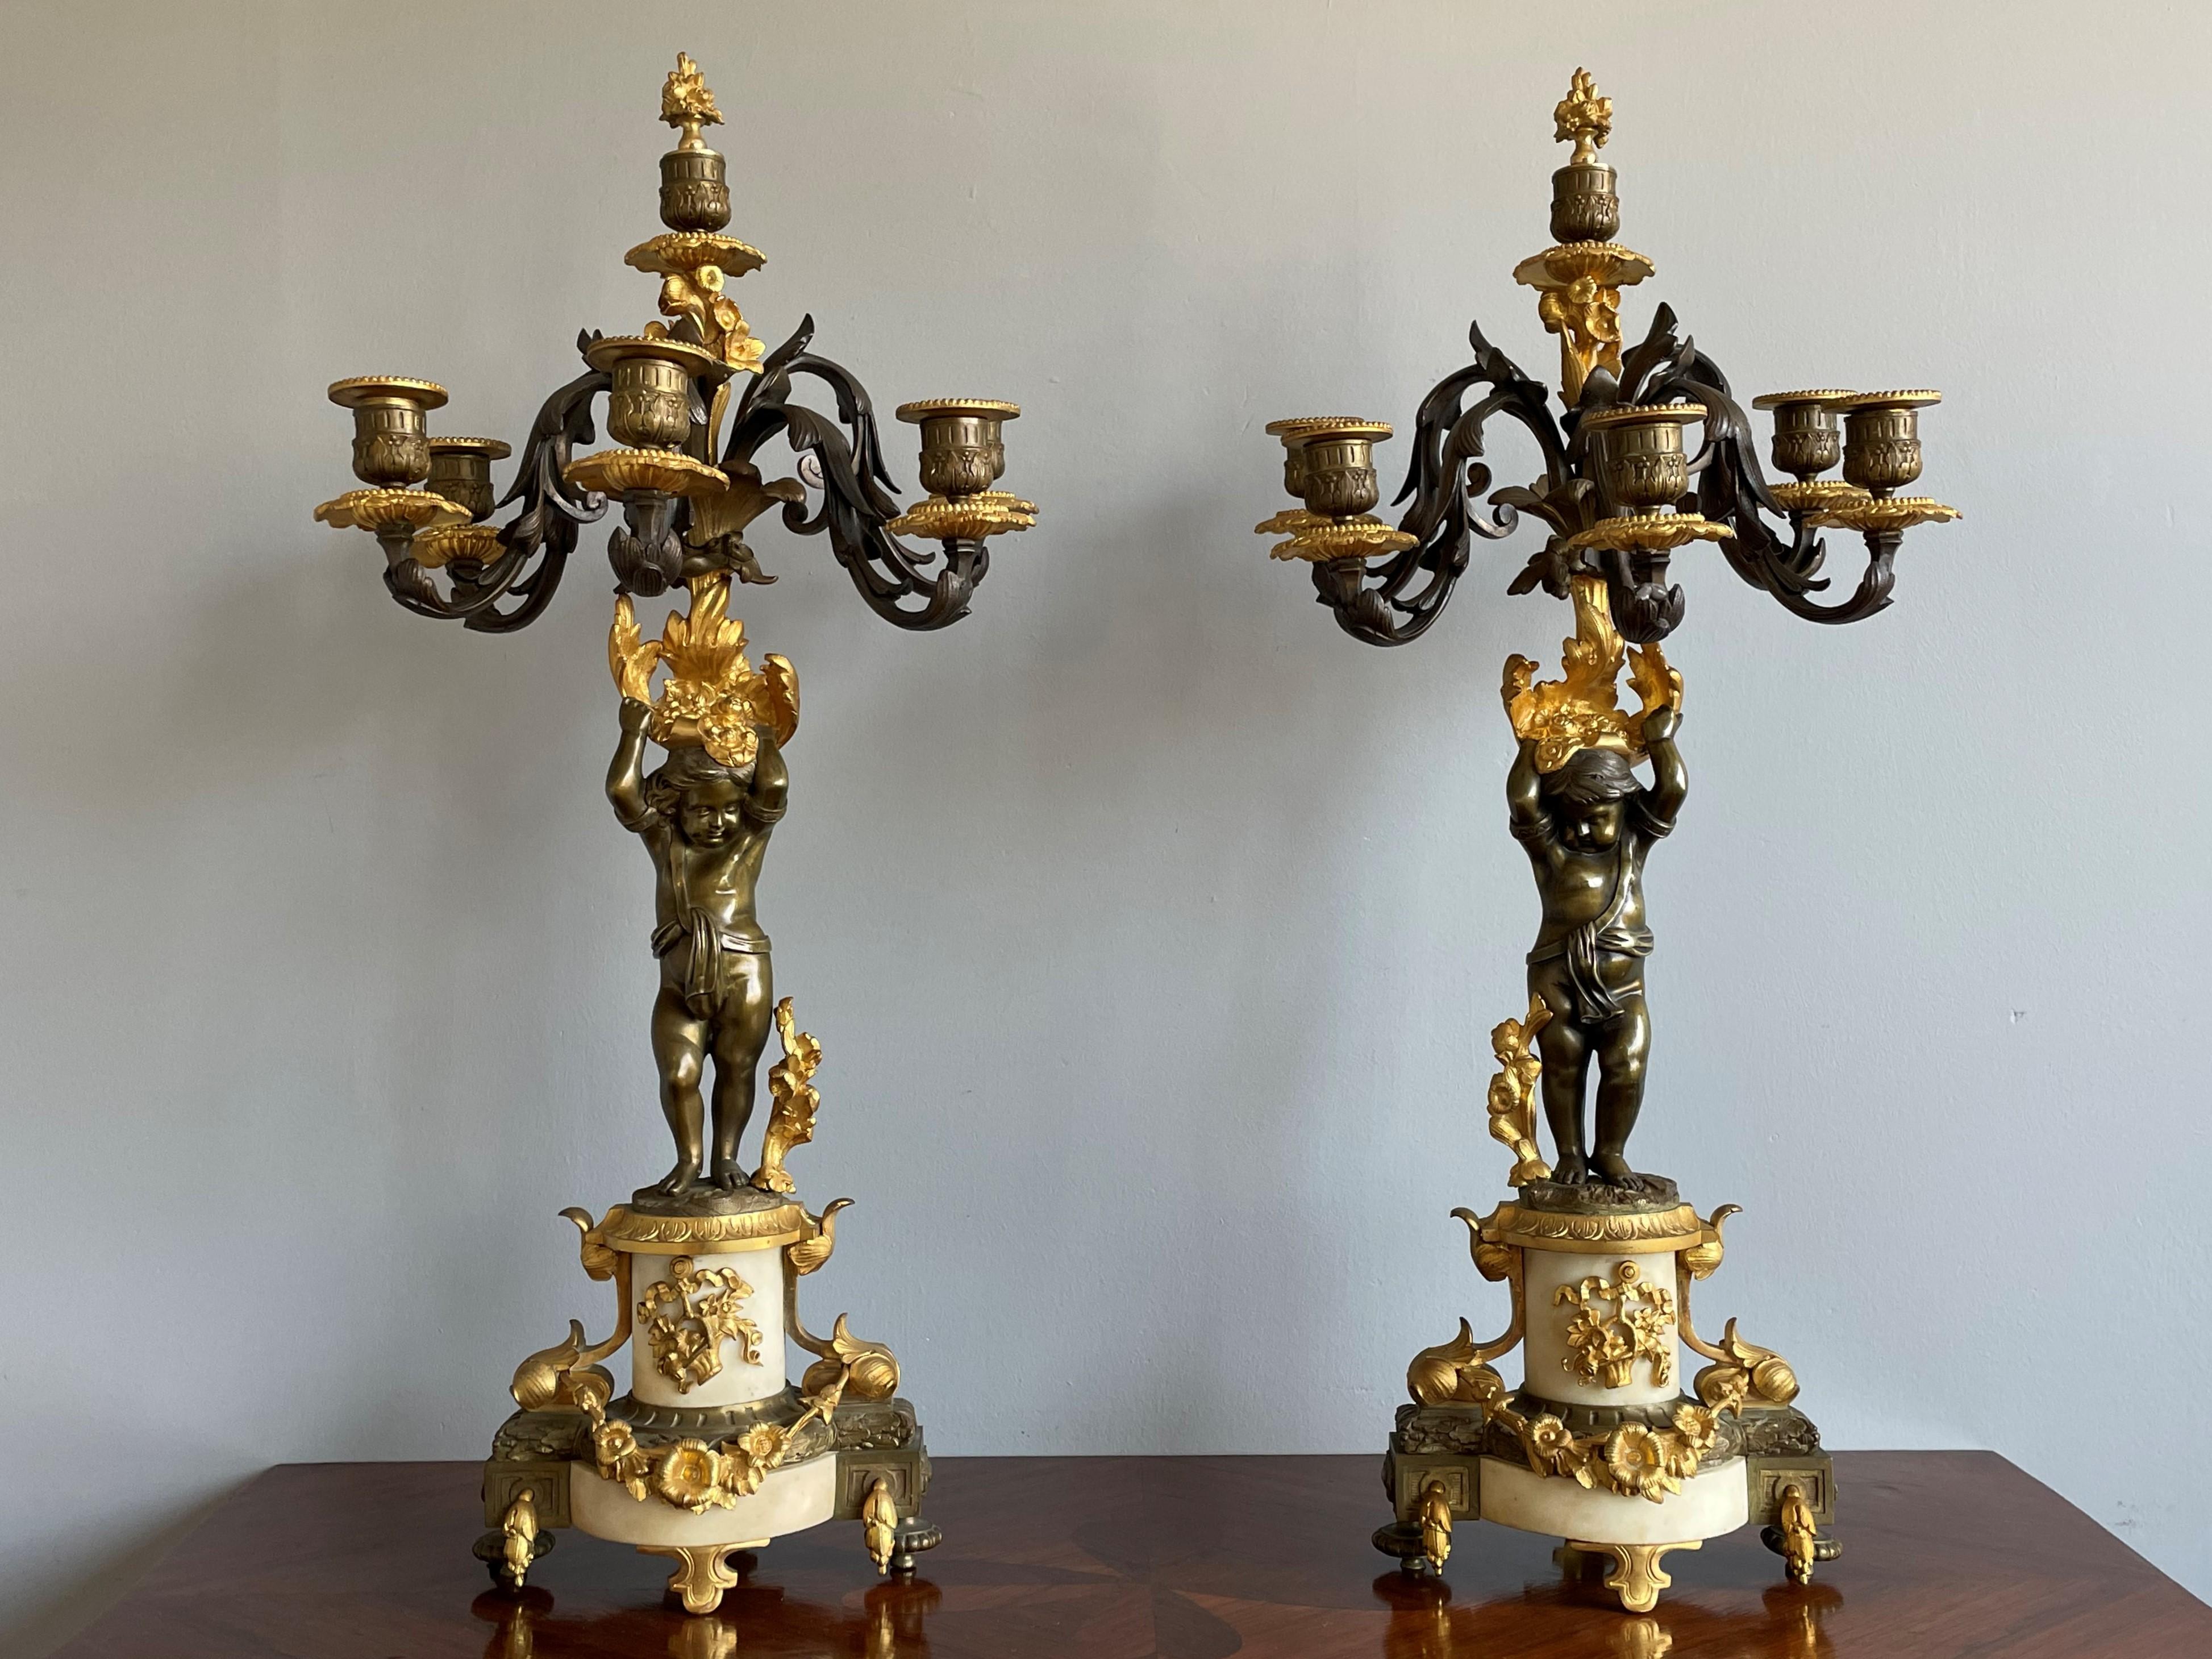 Stunning Pair of French Louis XVI Style Gilt Bronze & Marble Candle Candelabras For Sale 5